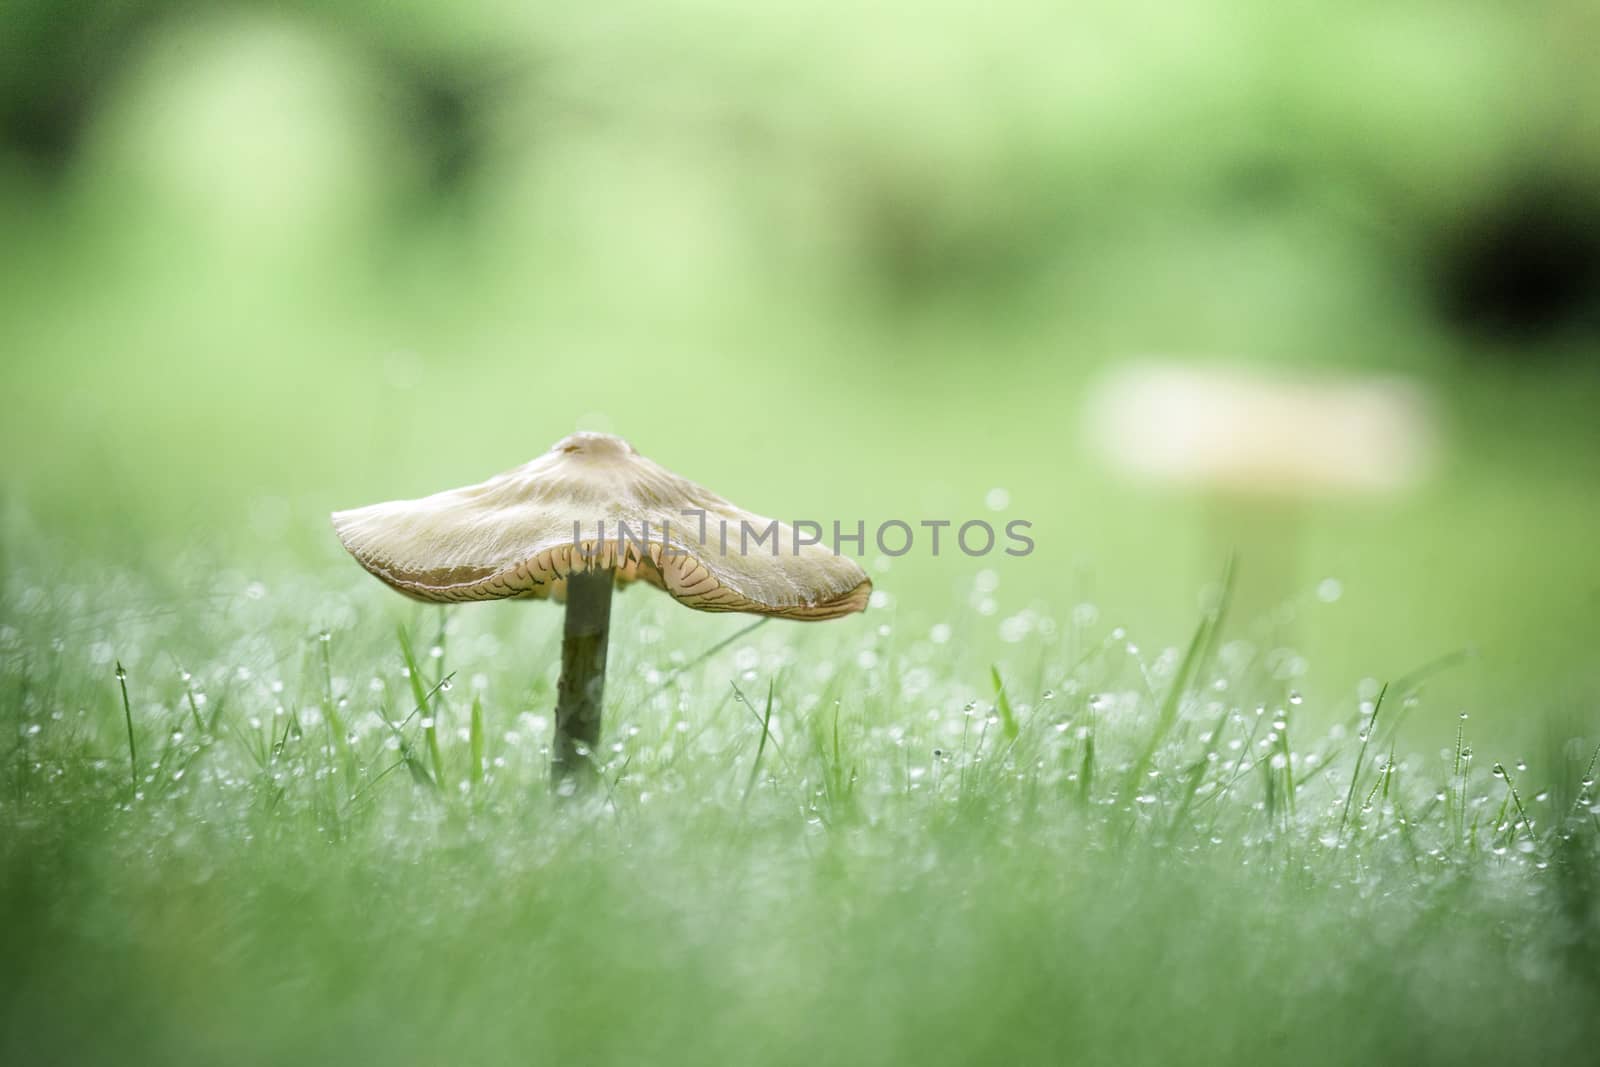 Mushroom on a green lawn in the fall with dew in the grass on an early morning